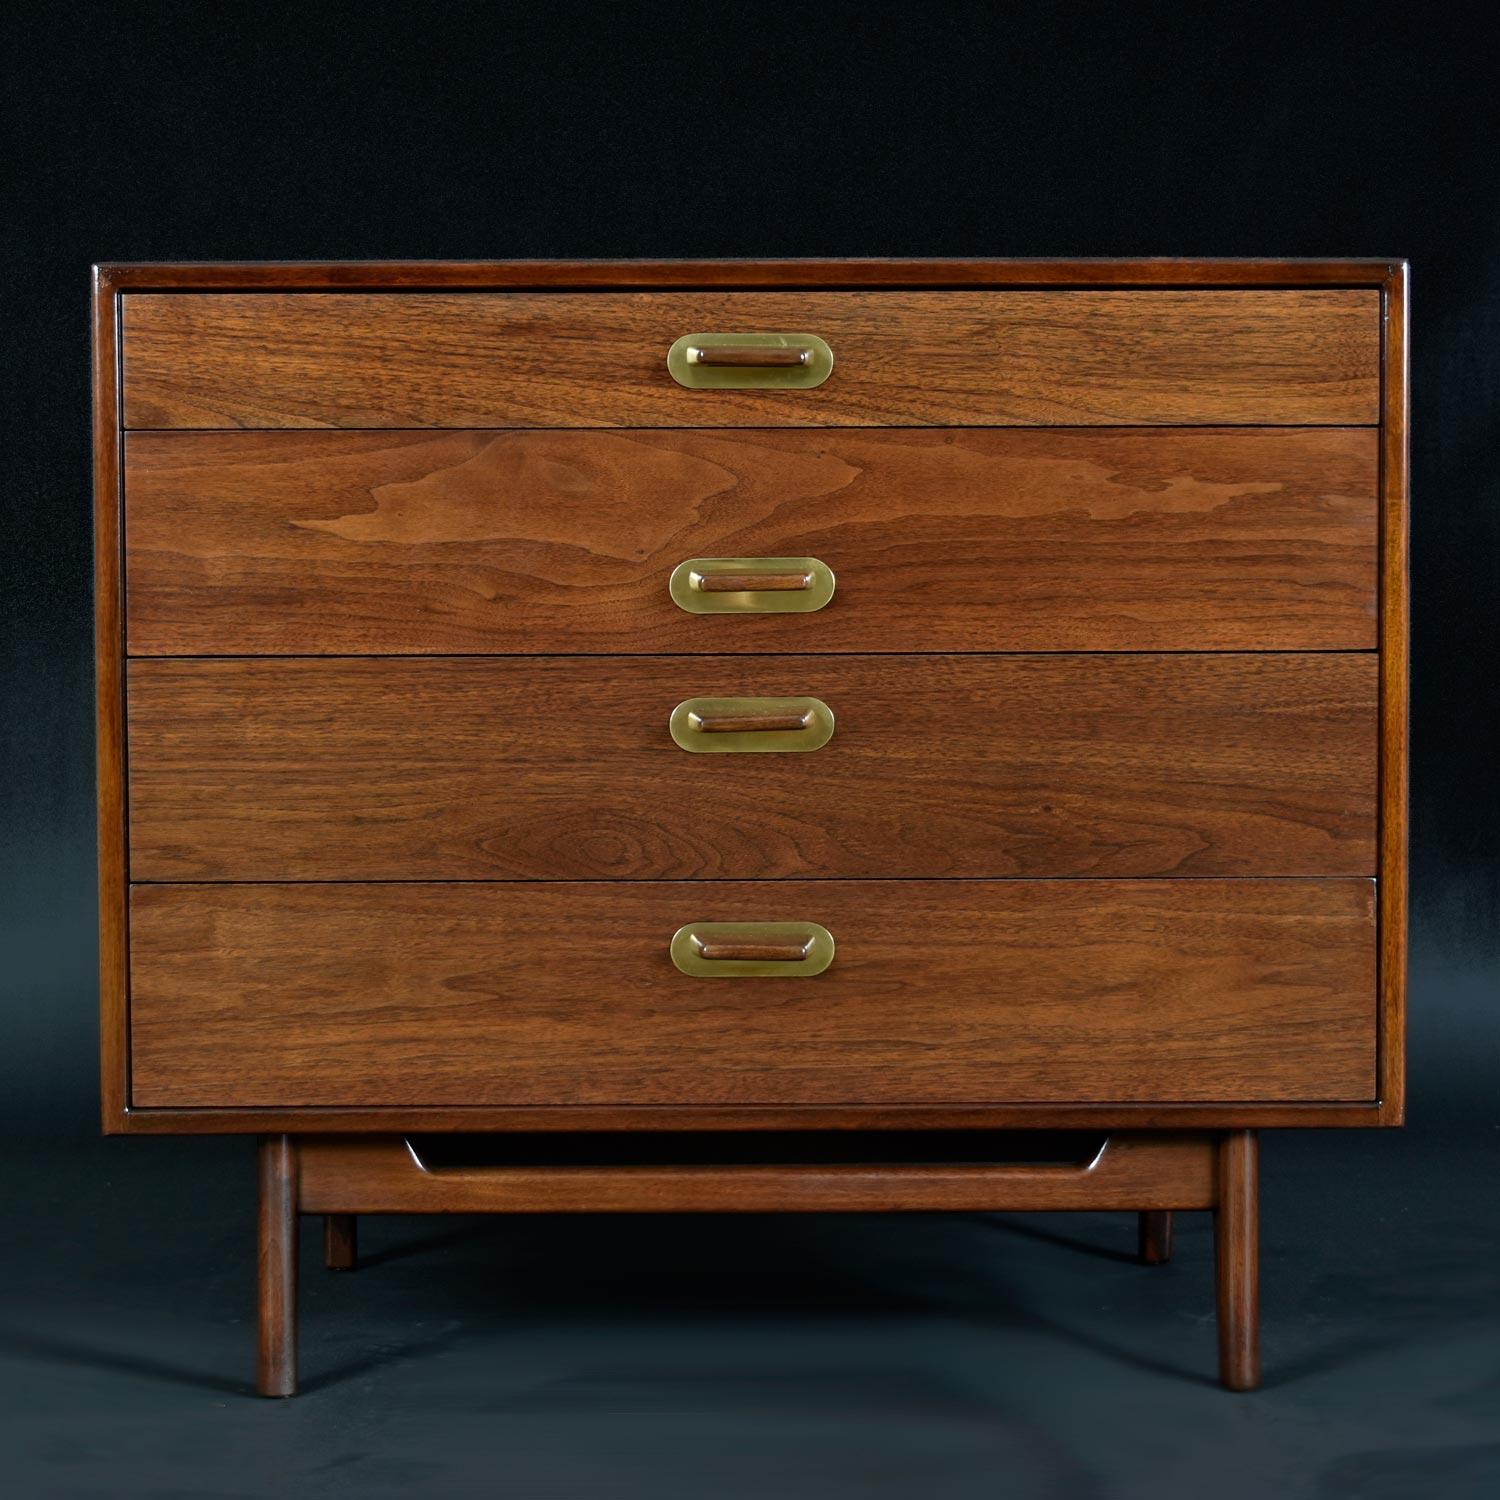 This 3-piece set was delicately restored to preserve the original dark patina and we are beyond elated with the end results. We love this line and have never had them in our clutches until now. Because of the variations in walnut grain and the